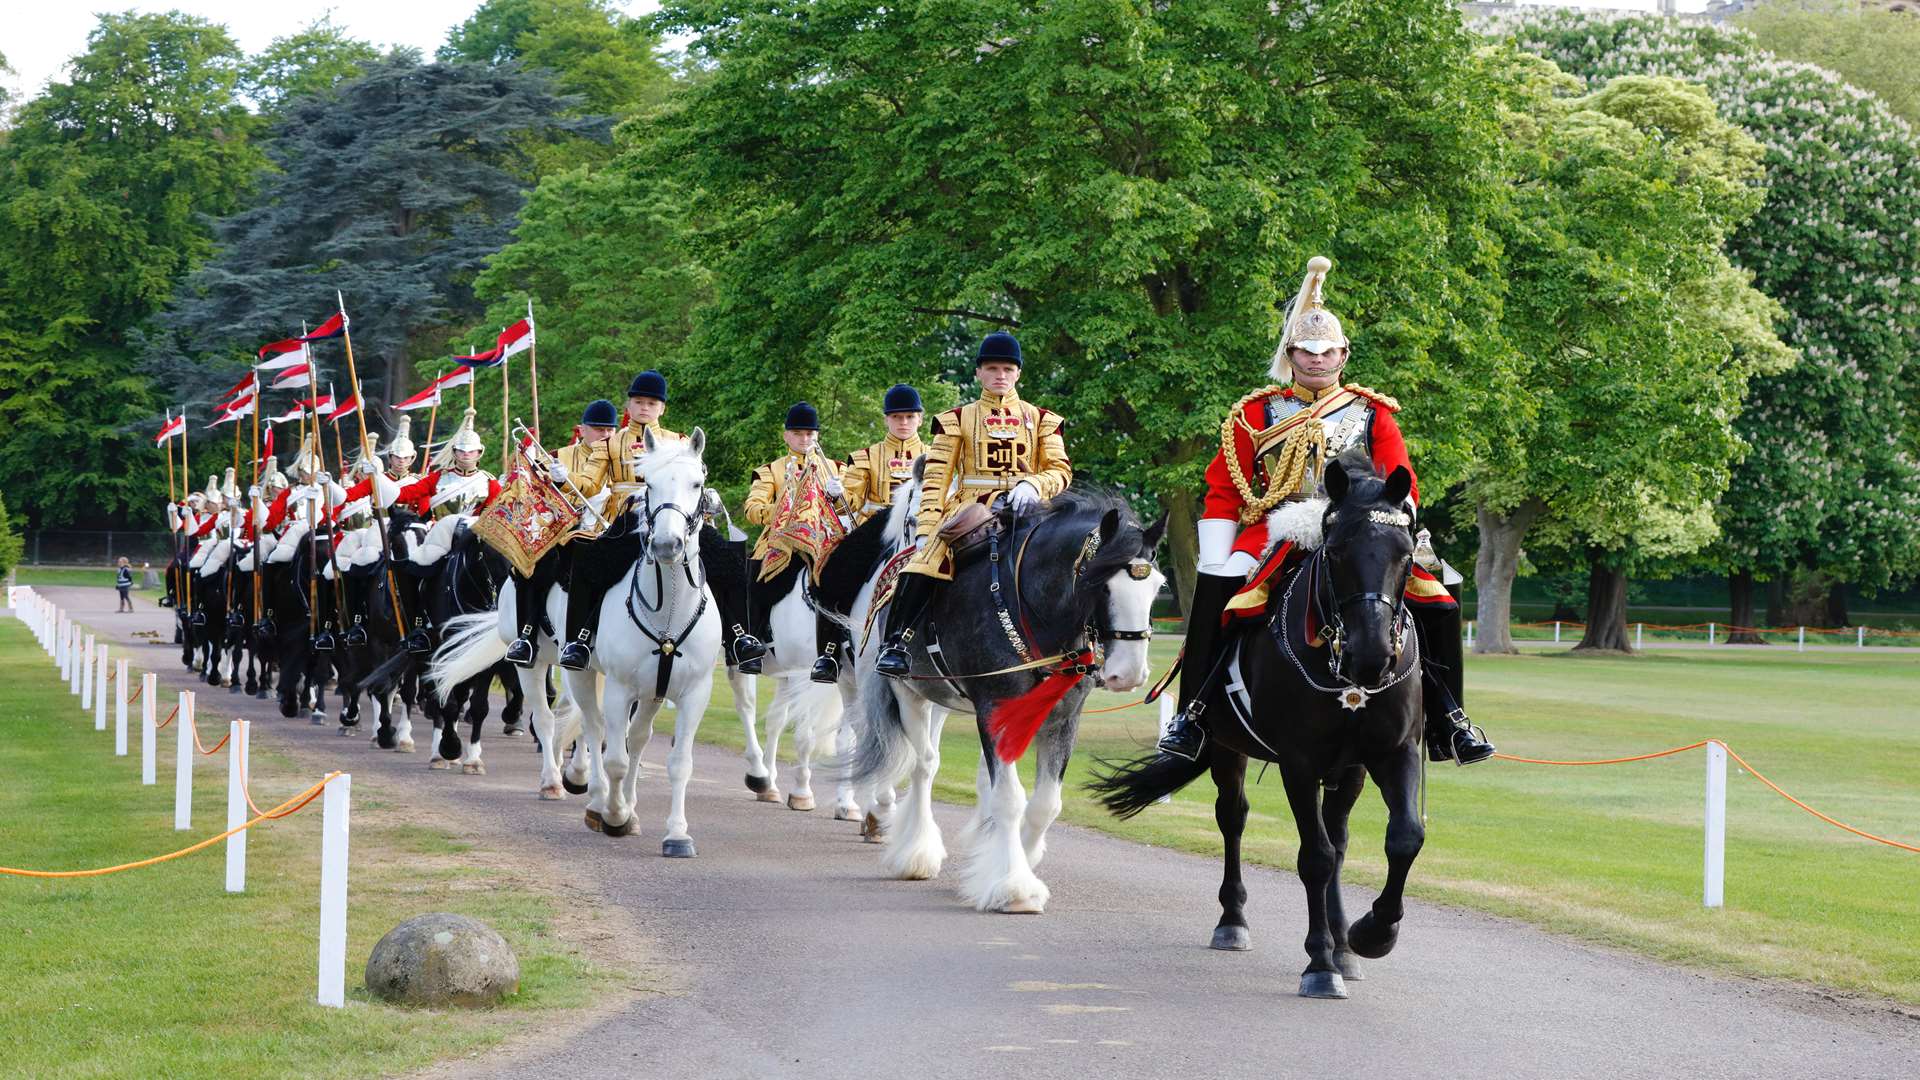 The Household Cavalry Mounted Regiment will be at the county show next summer